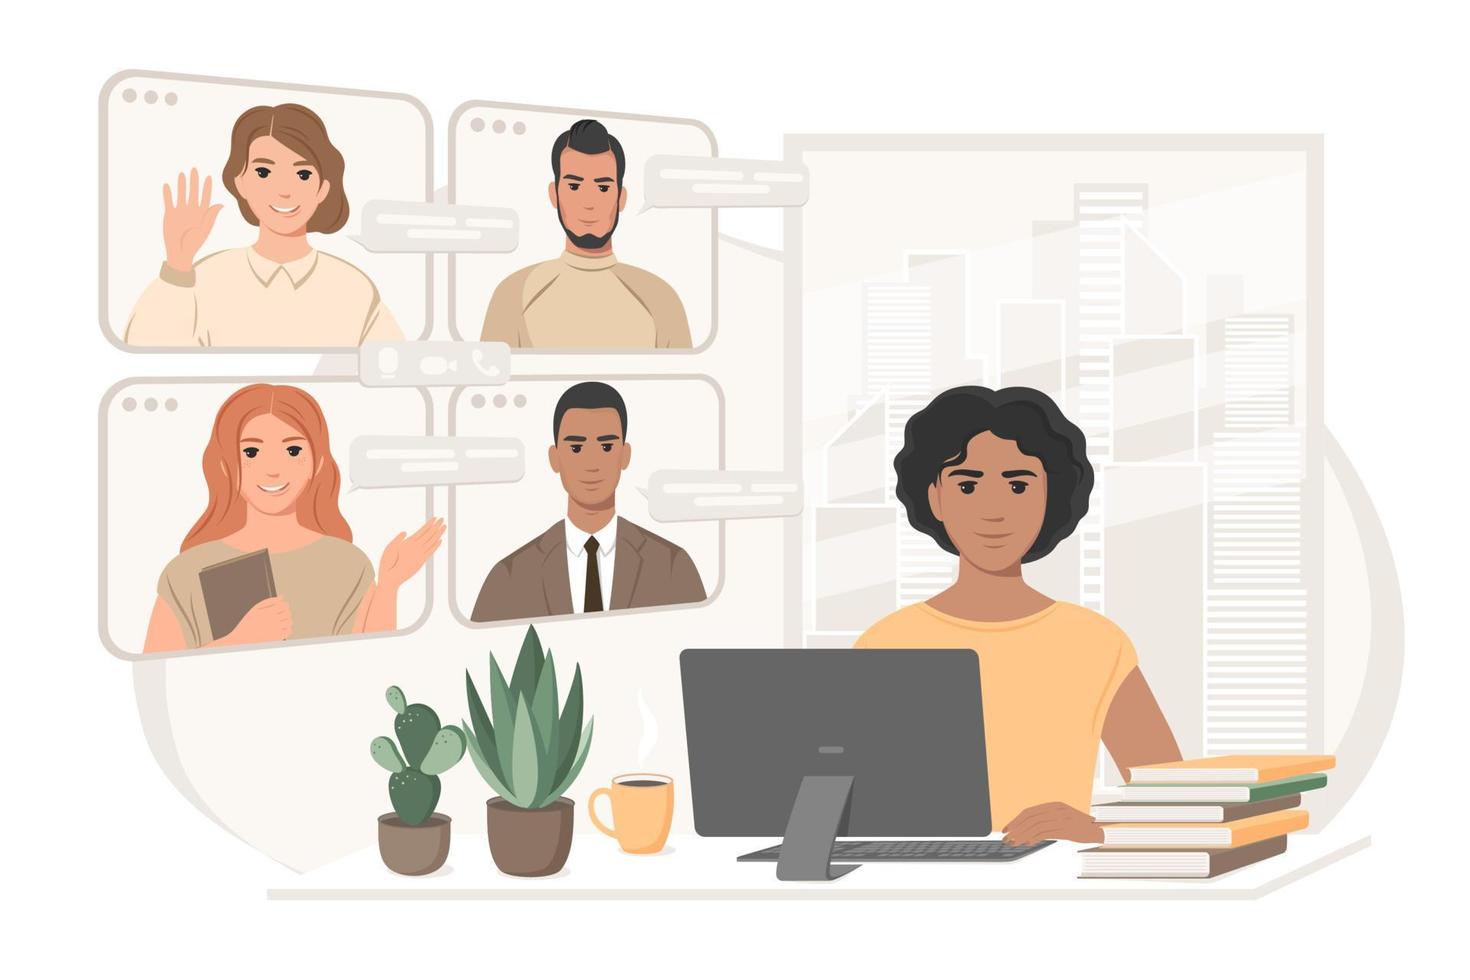 Online meeting via group call. Woman is working from home and meeting from colleagues or friends online via video conferencConcept working from home. Vector illustration in flat style.